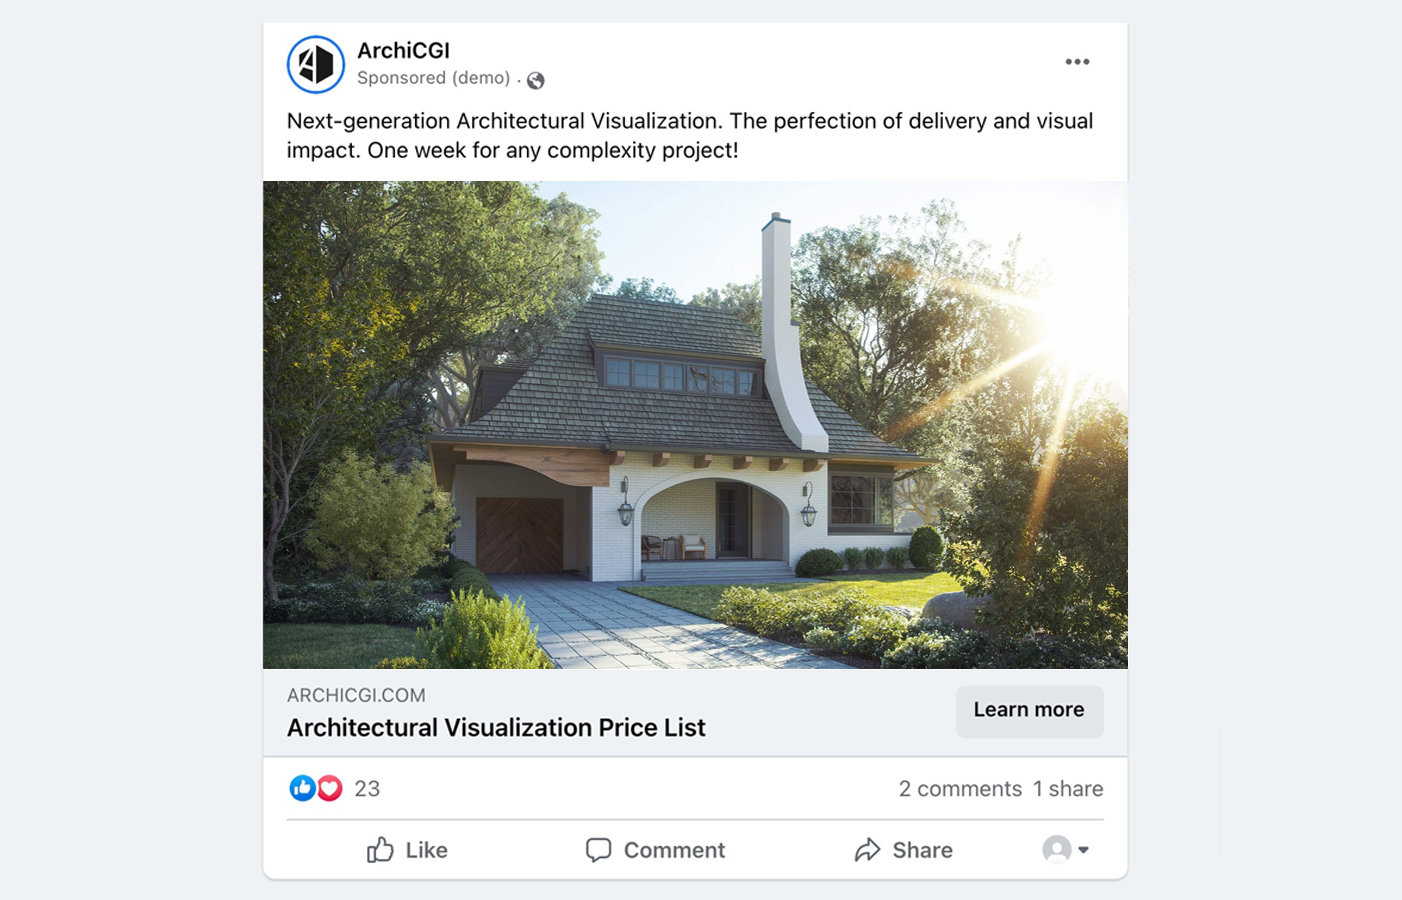 Paid Real Estate Ads on Social Media